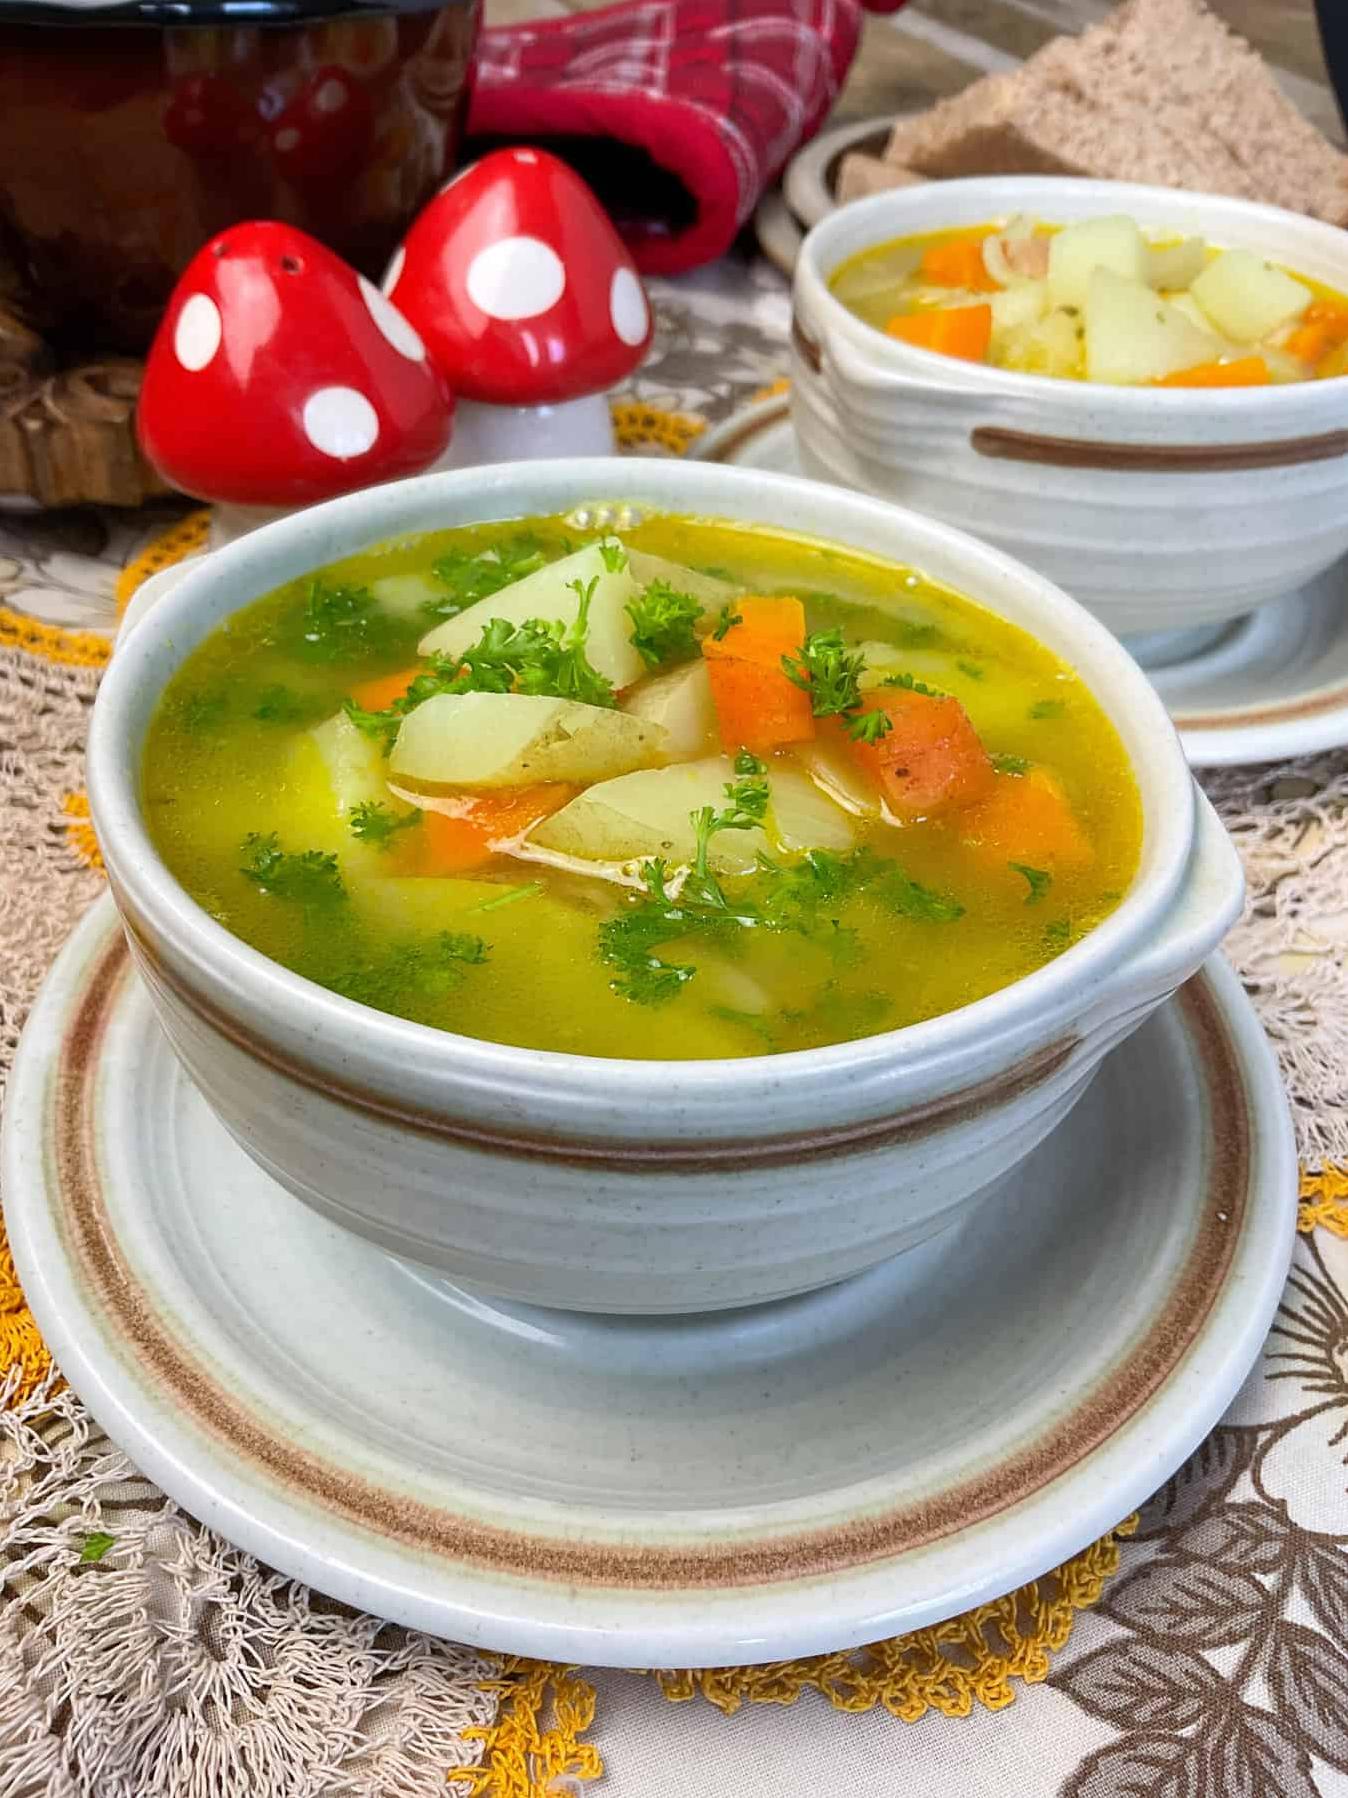  Want a taste of Scotland? Try this flavorful Potato Dulse Soup!